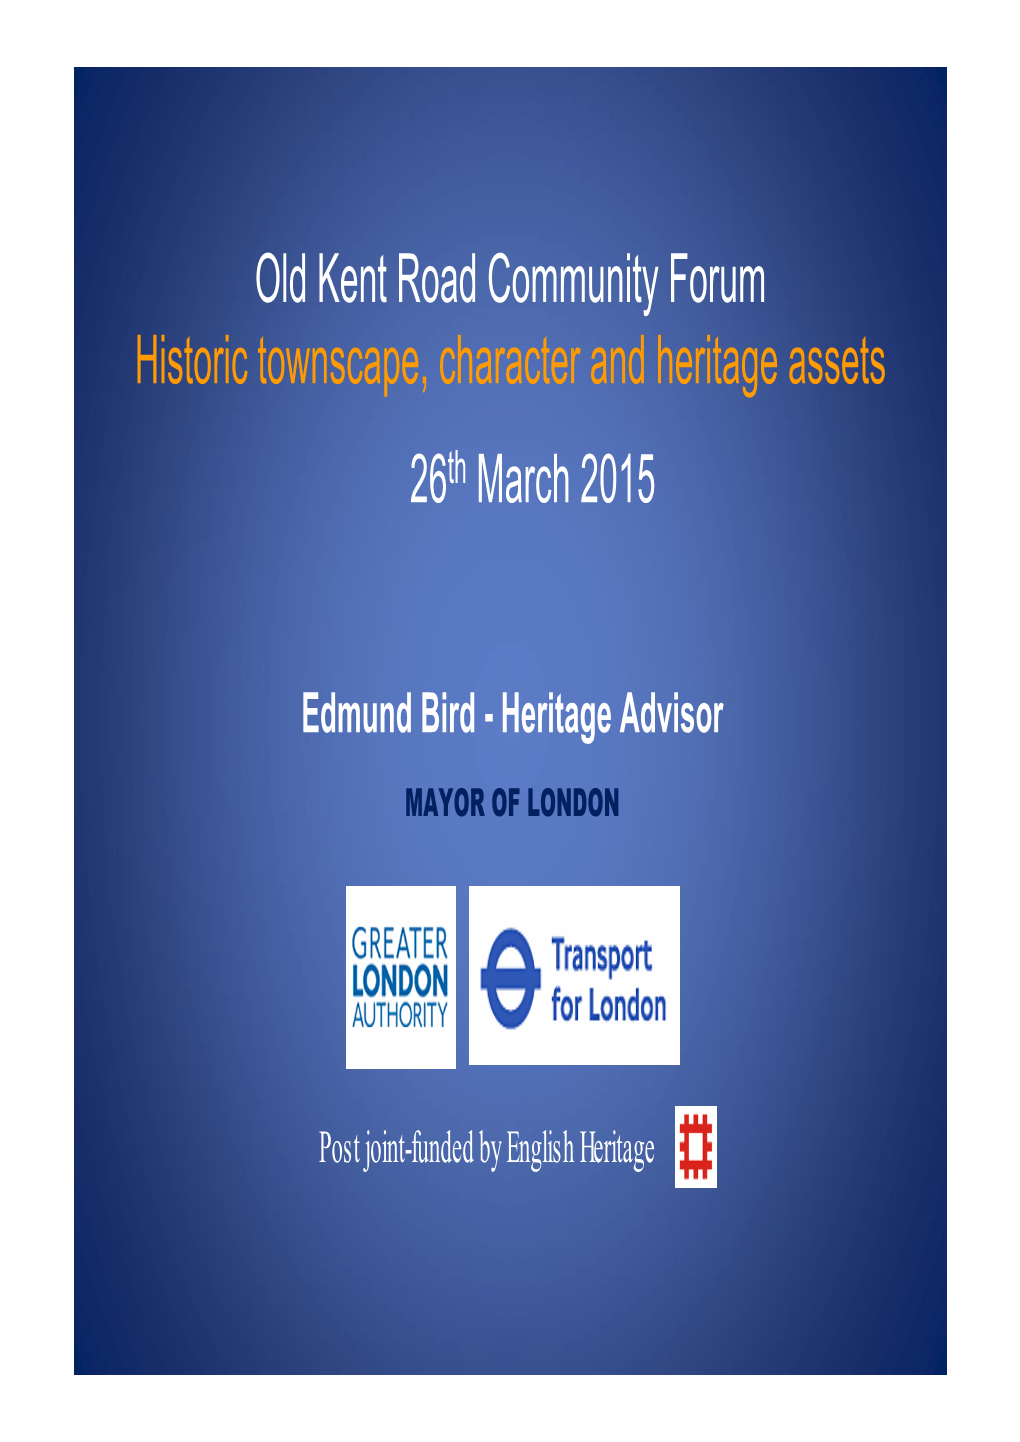 Old Kent Road Community Forum Historic Townscape, Character and Heritage Assets 26Th March 2015